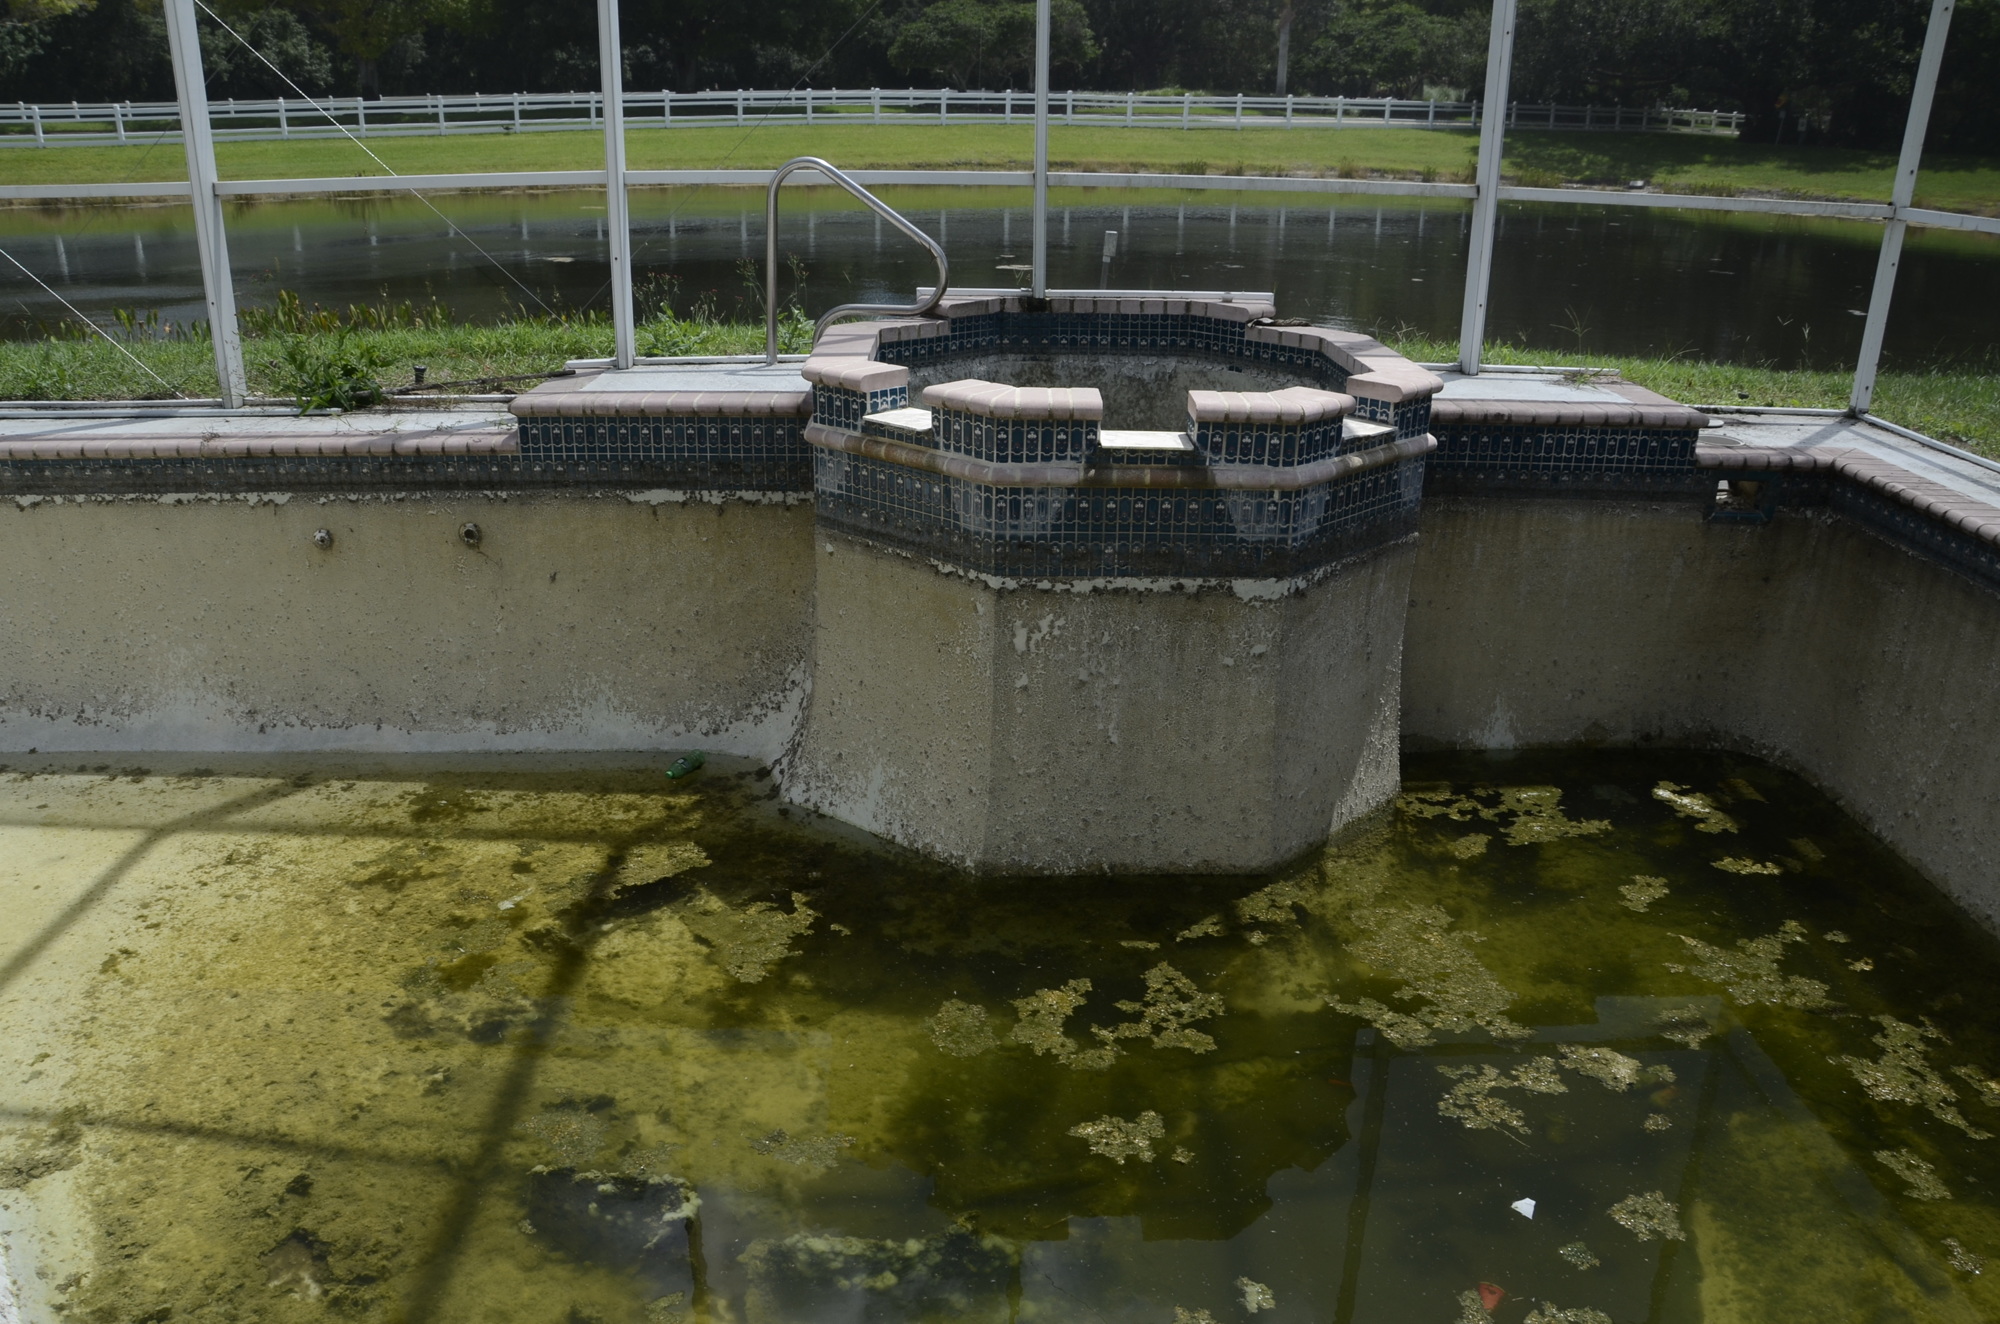 Algae-filled water stands in the pool, which overlooks the lake.